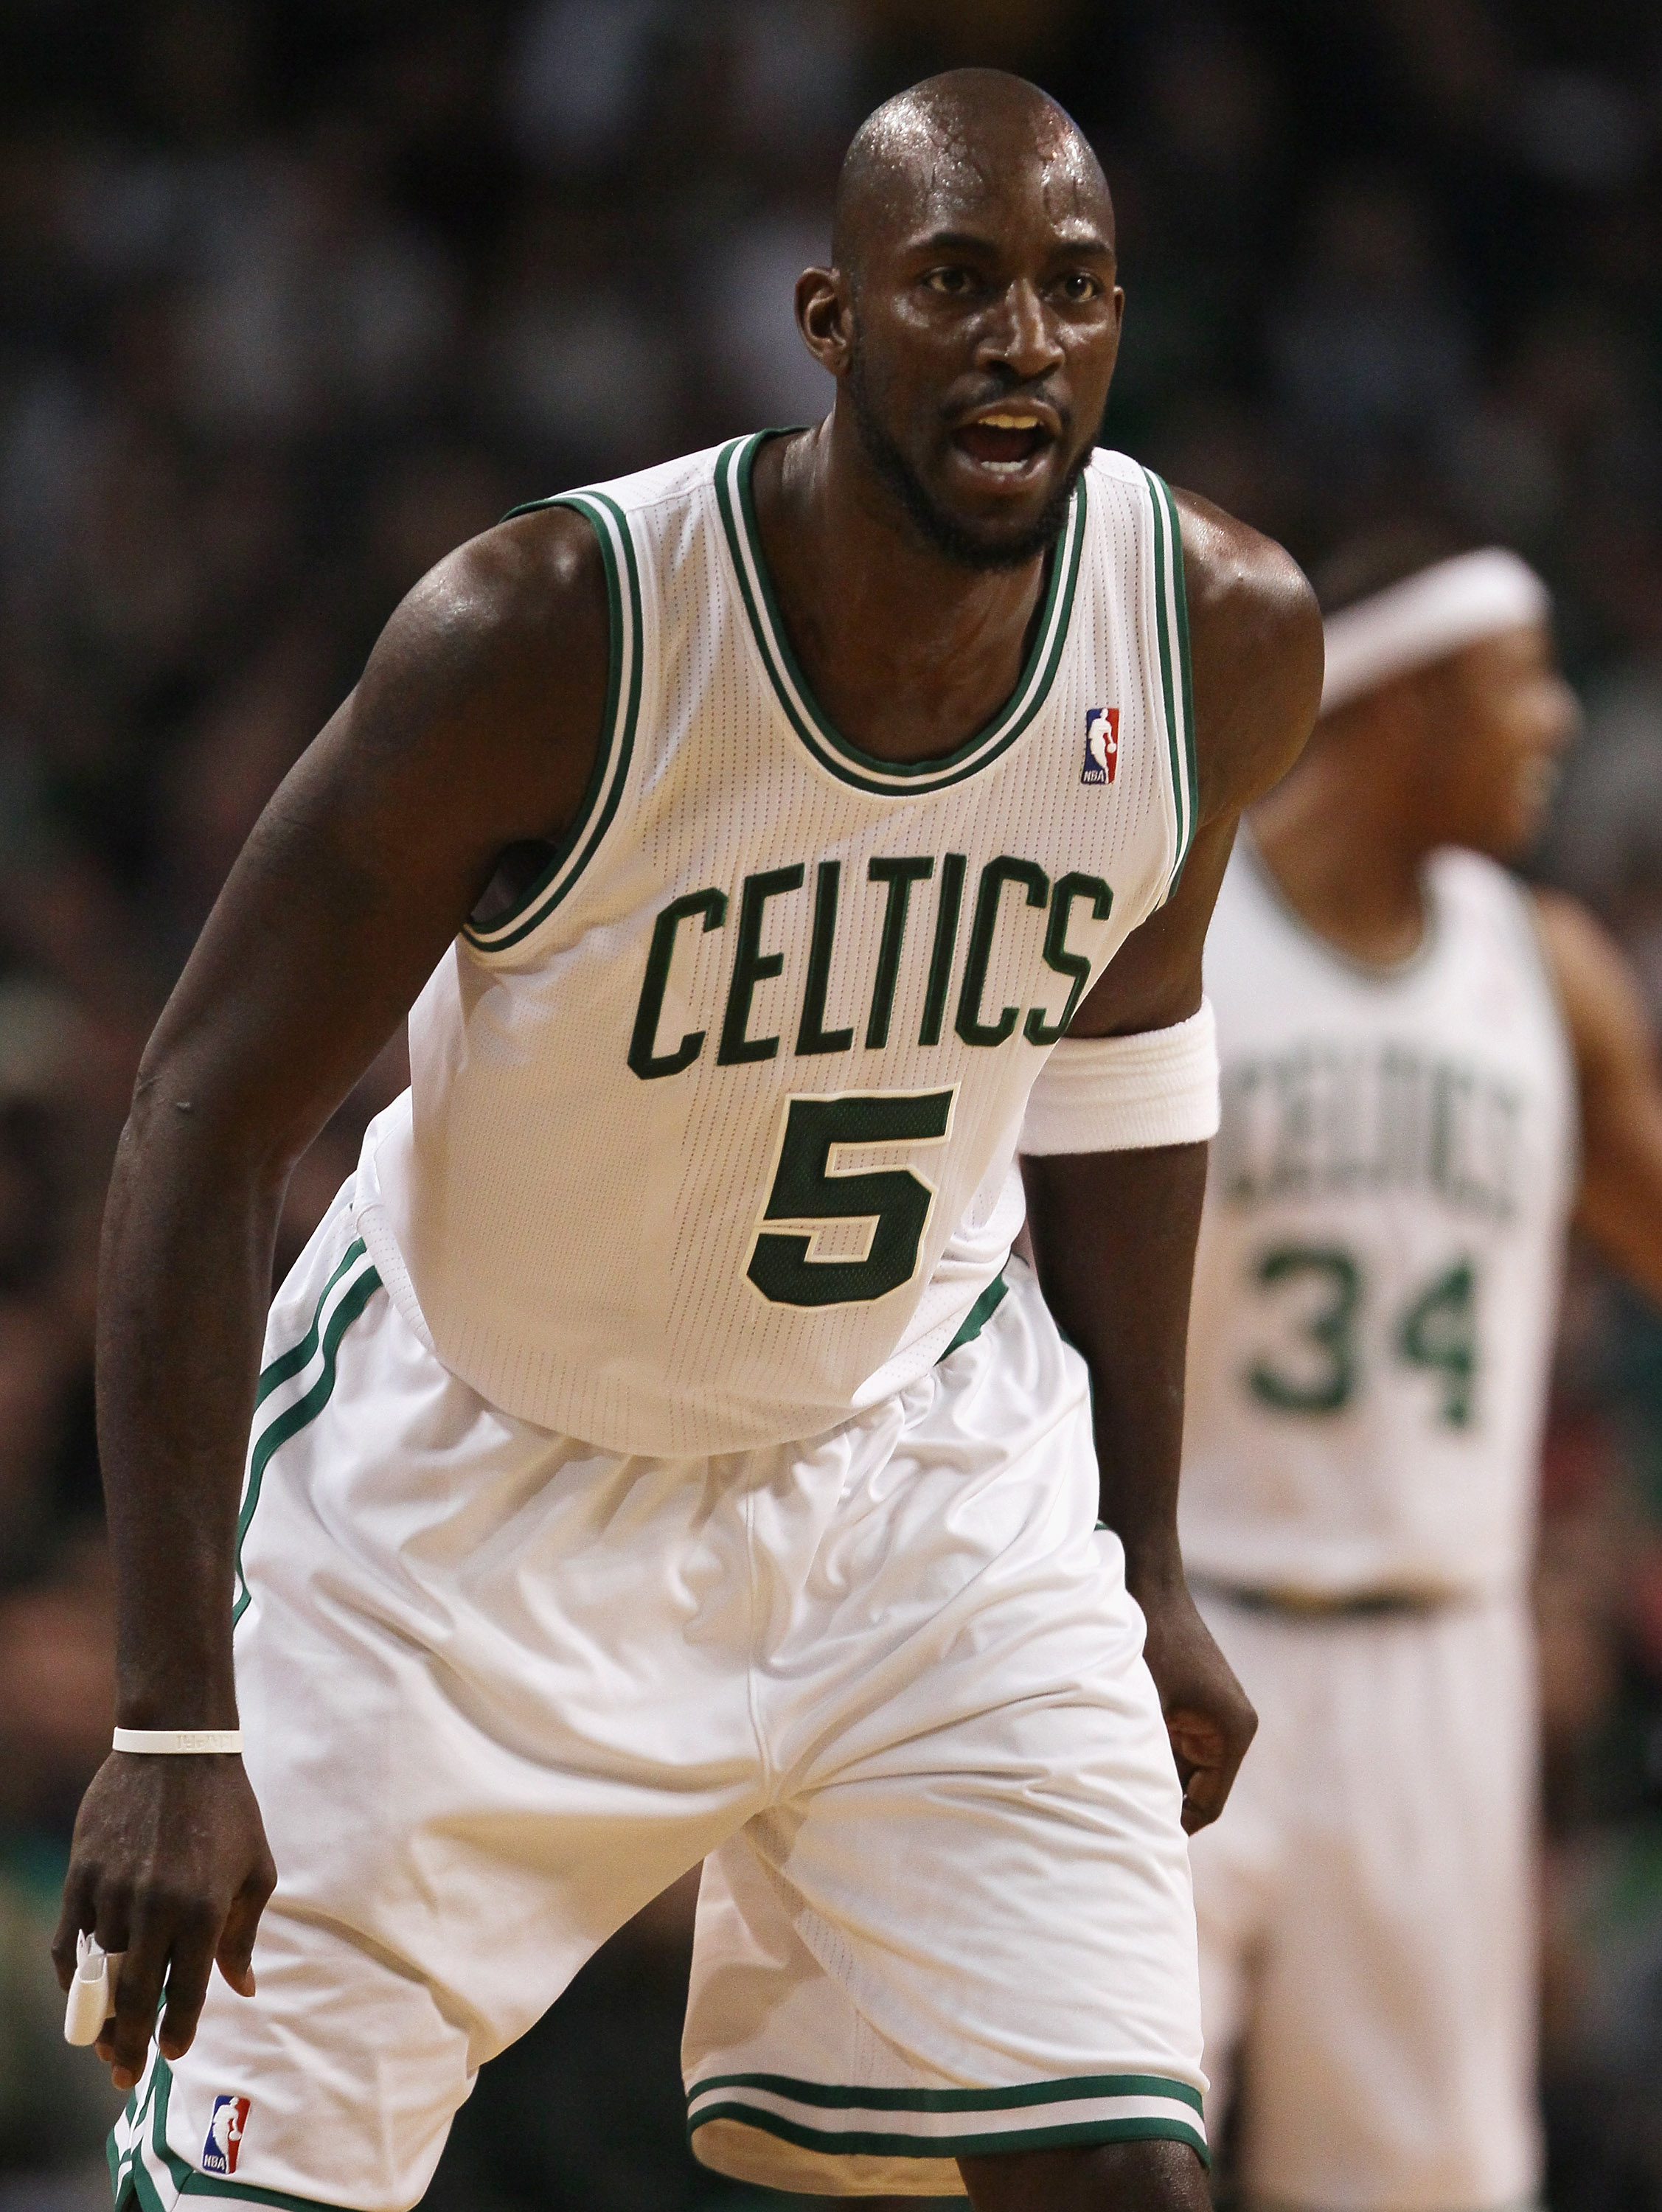 BOSTON, MA - JANUARY 17:  Kevin Garnett #5 of the Boston Celitcs makes a start in the game against the Orlando Magic on January 17, 2011 at the TD Garden in Boston, Massachusetts. Garnett missed several weeks due to a knee injury. NOTE TO USER: User expre